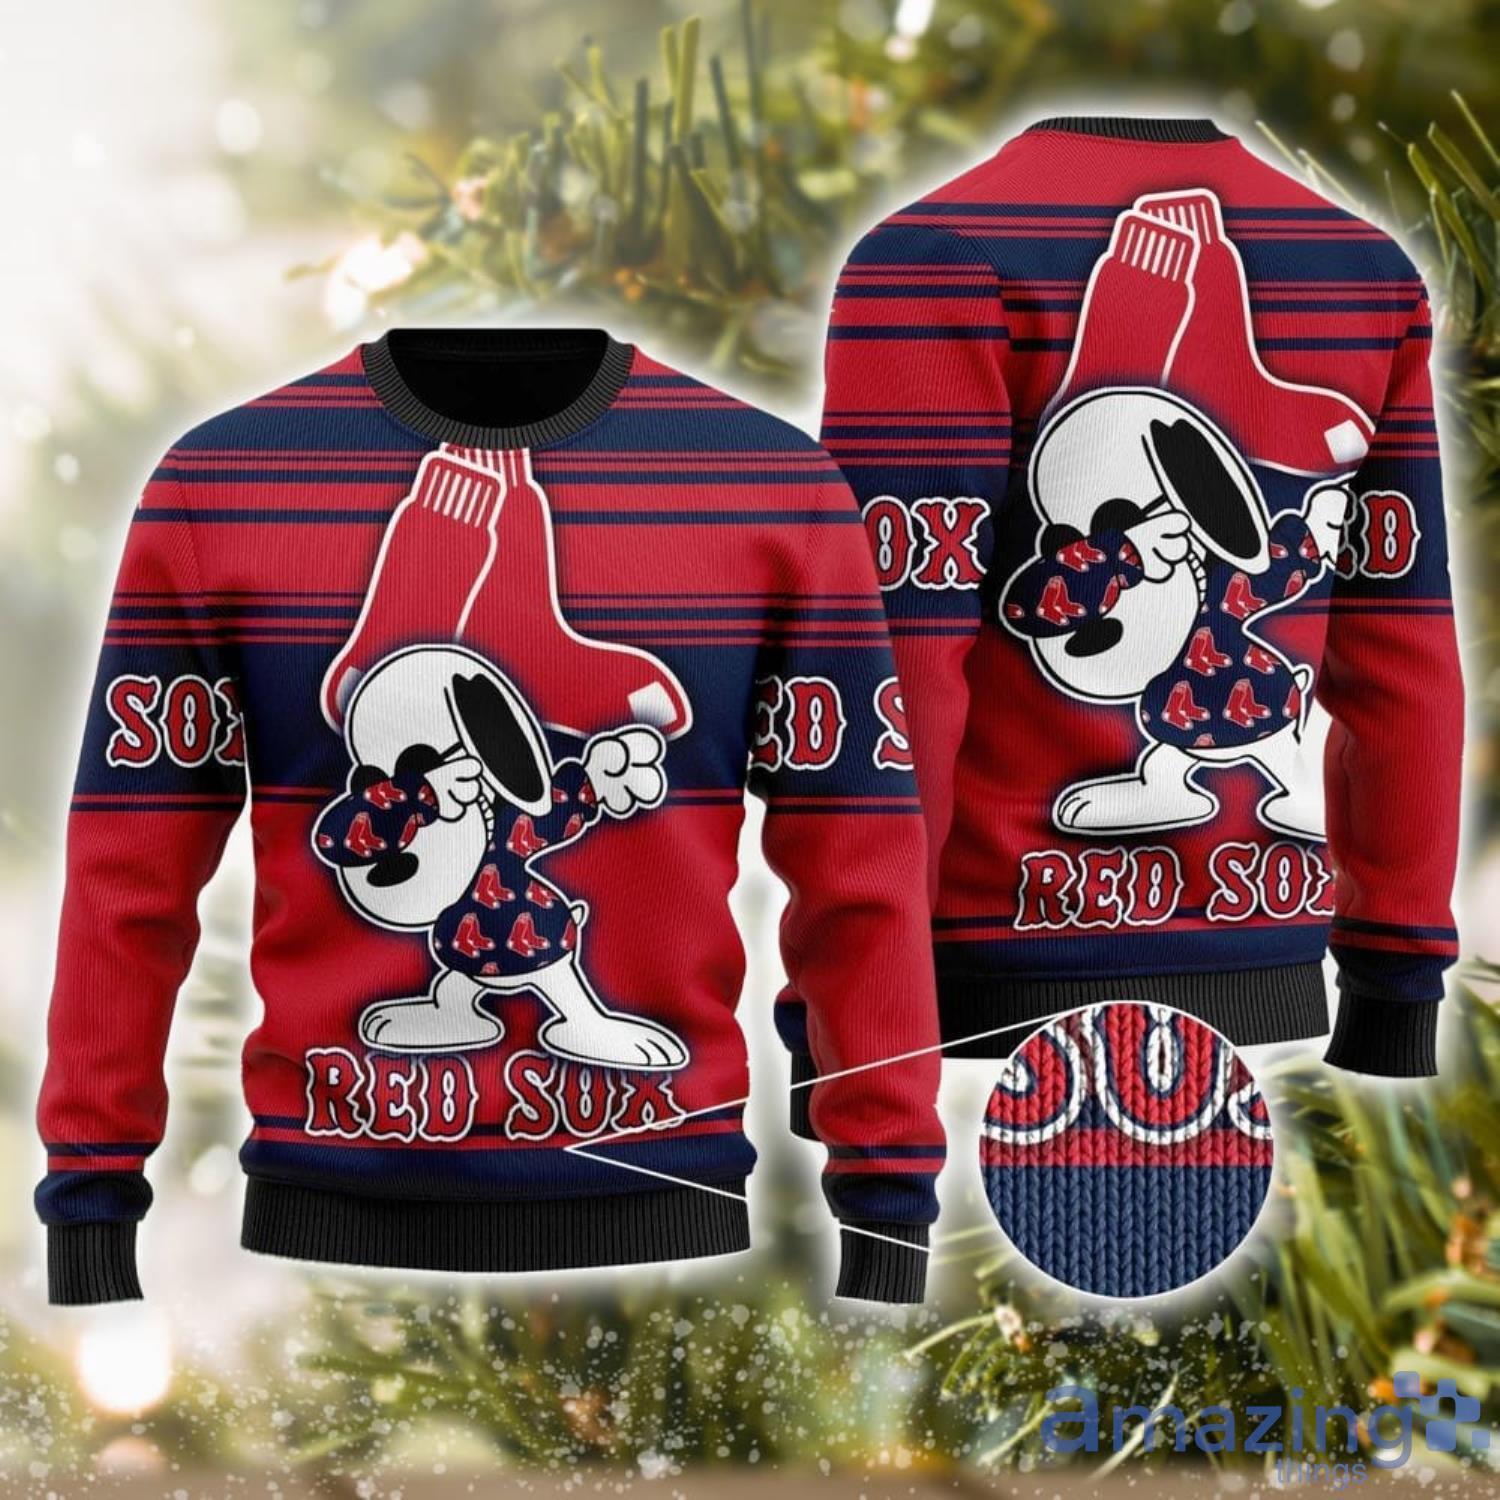 Boston Red Sox Tropical Patterns Knitted Xmas Sweater Gift